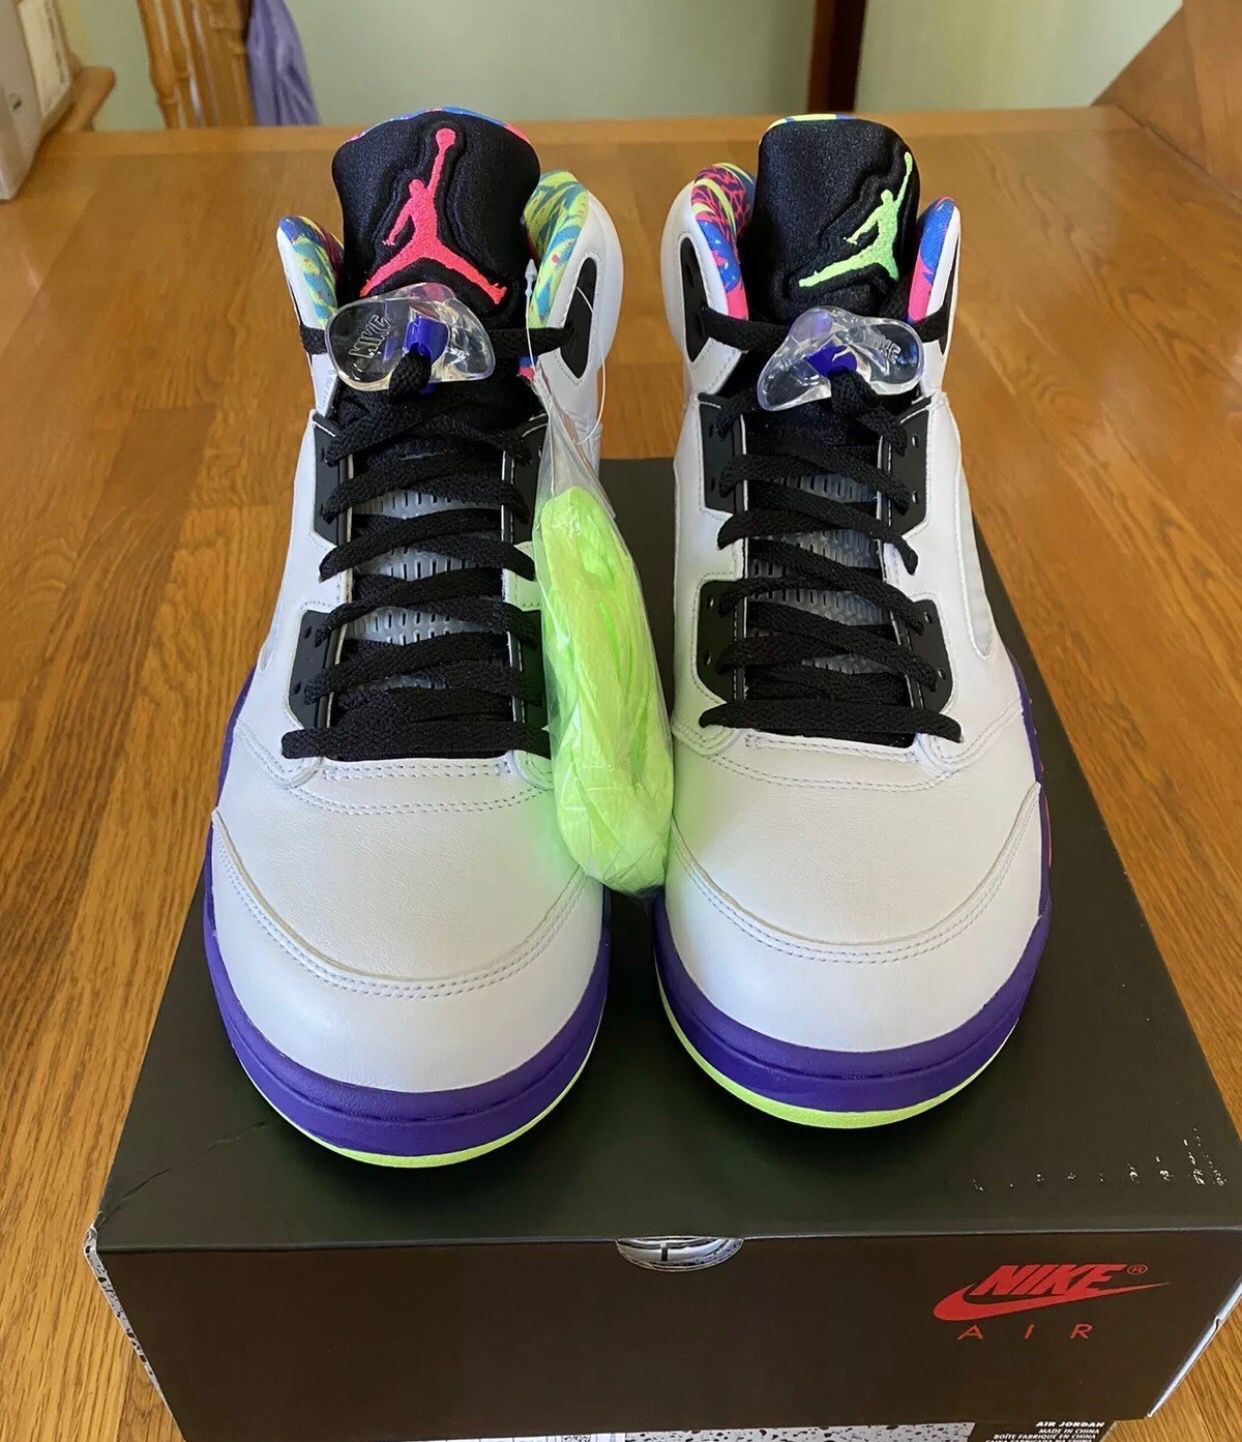 JORDAN 5 BEL AIR SIZES 10.5 11 12 13 AVAILABLE [IN HAND BRAND NEW]